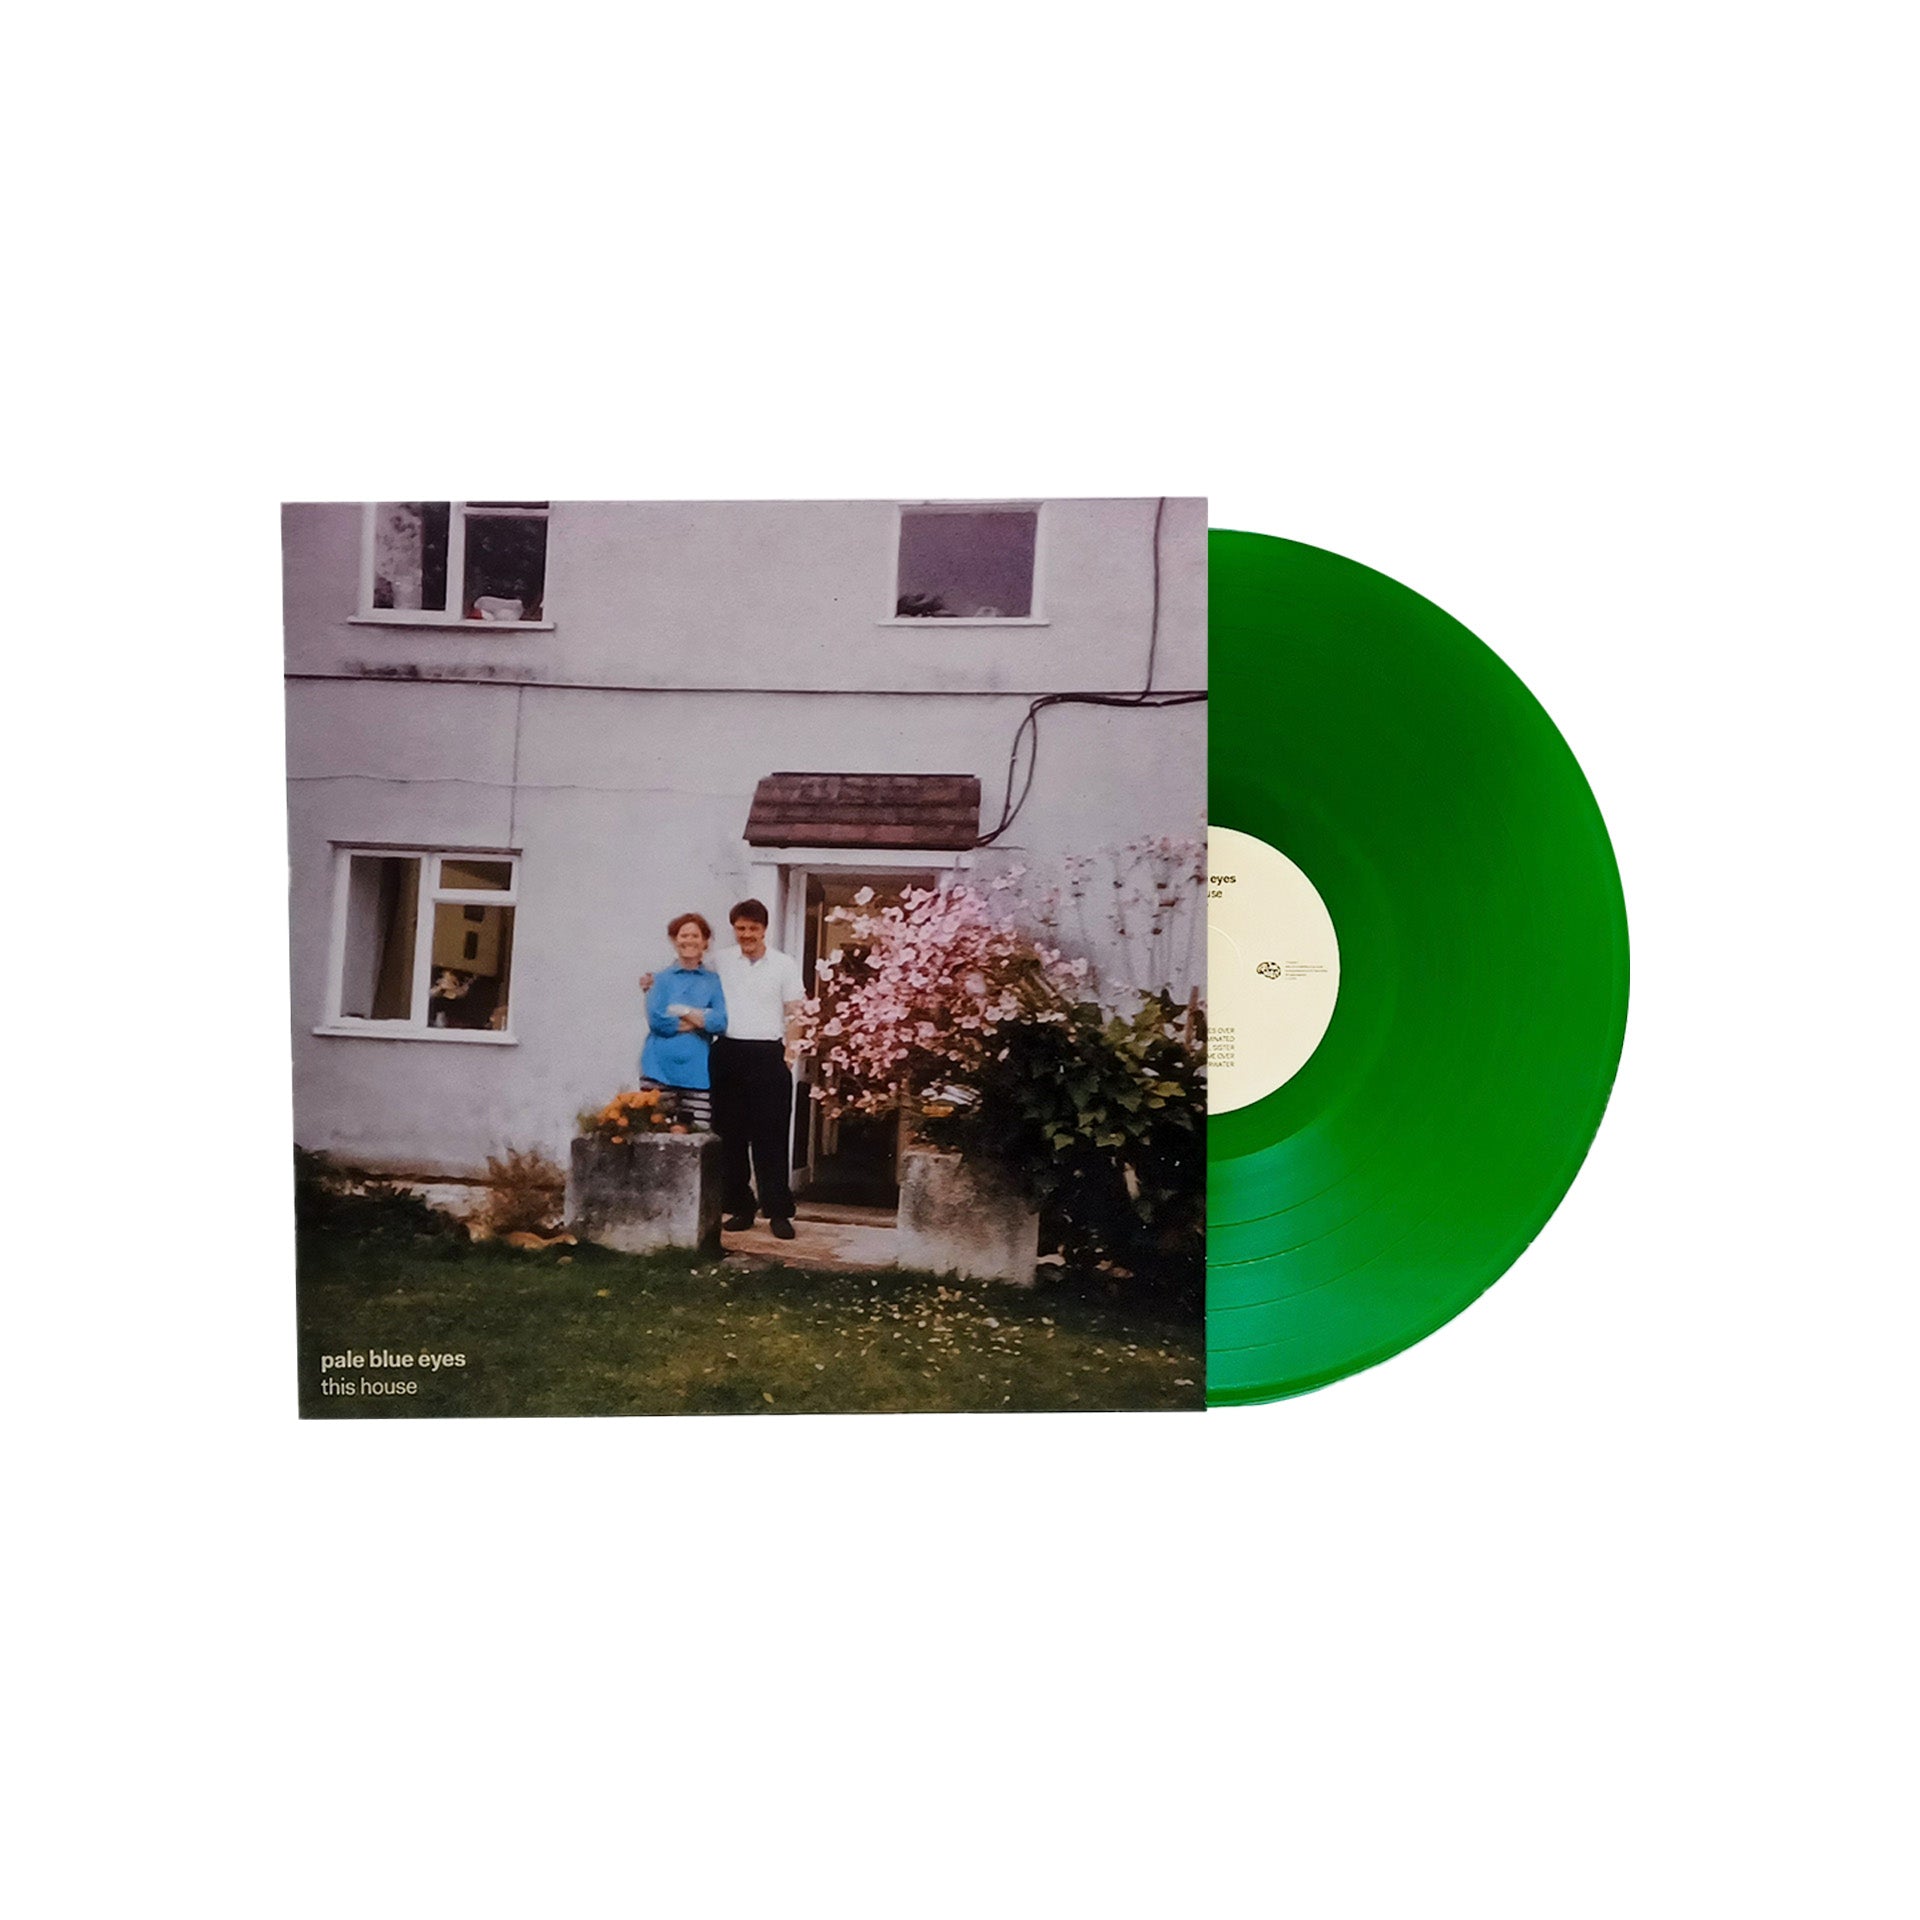 This House: Limited Green Vinyl LP